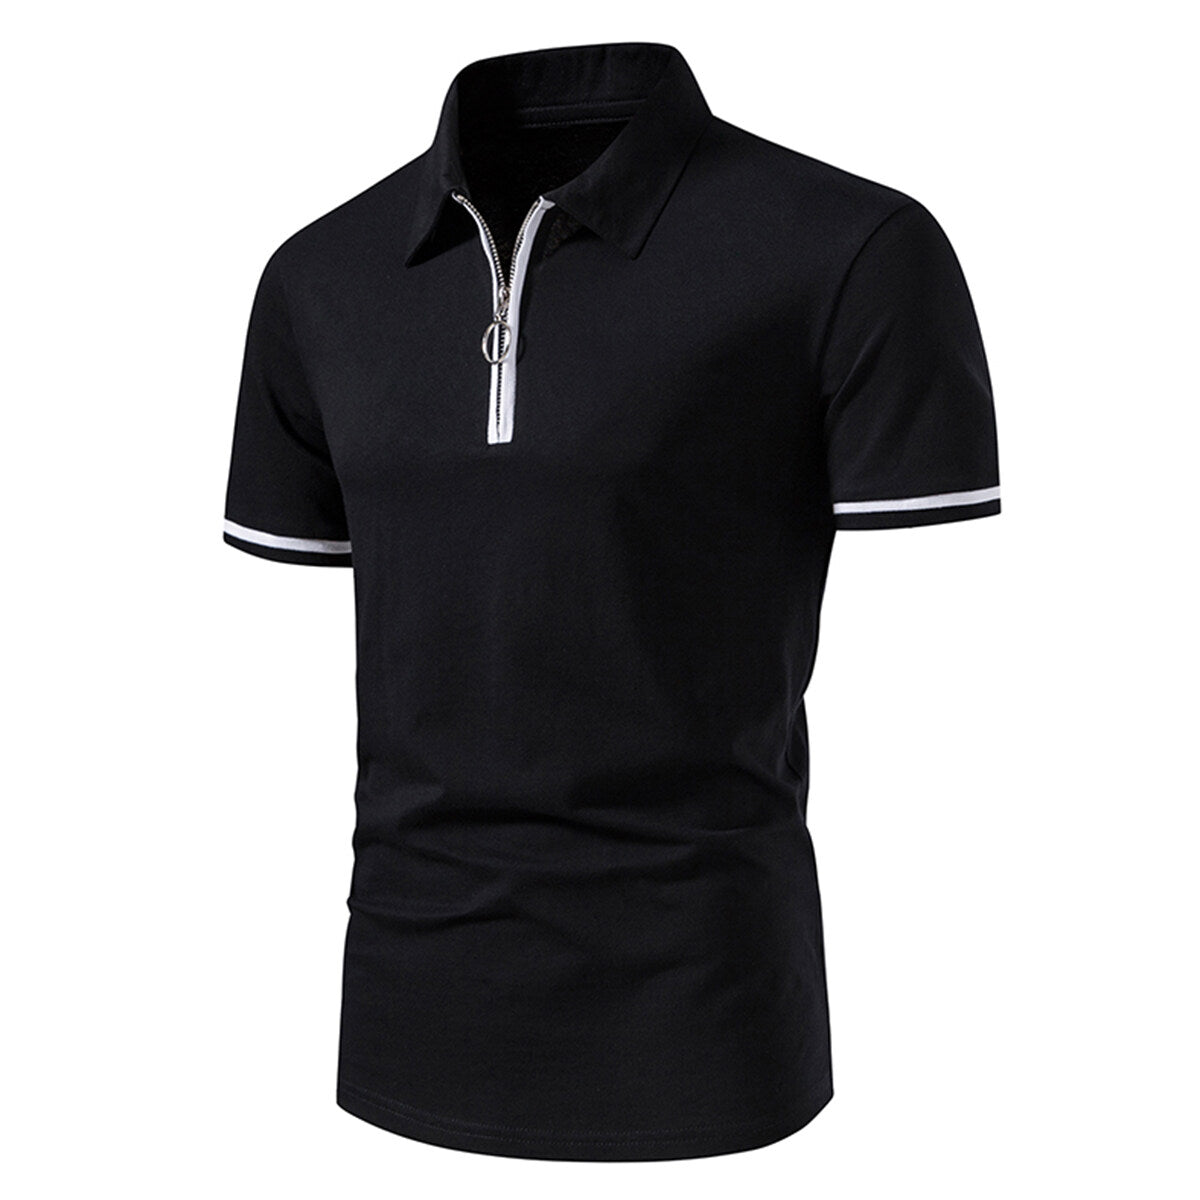 Men's Fitted Tailored Polo Neck Short-Sleeve T-Shirt Black